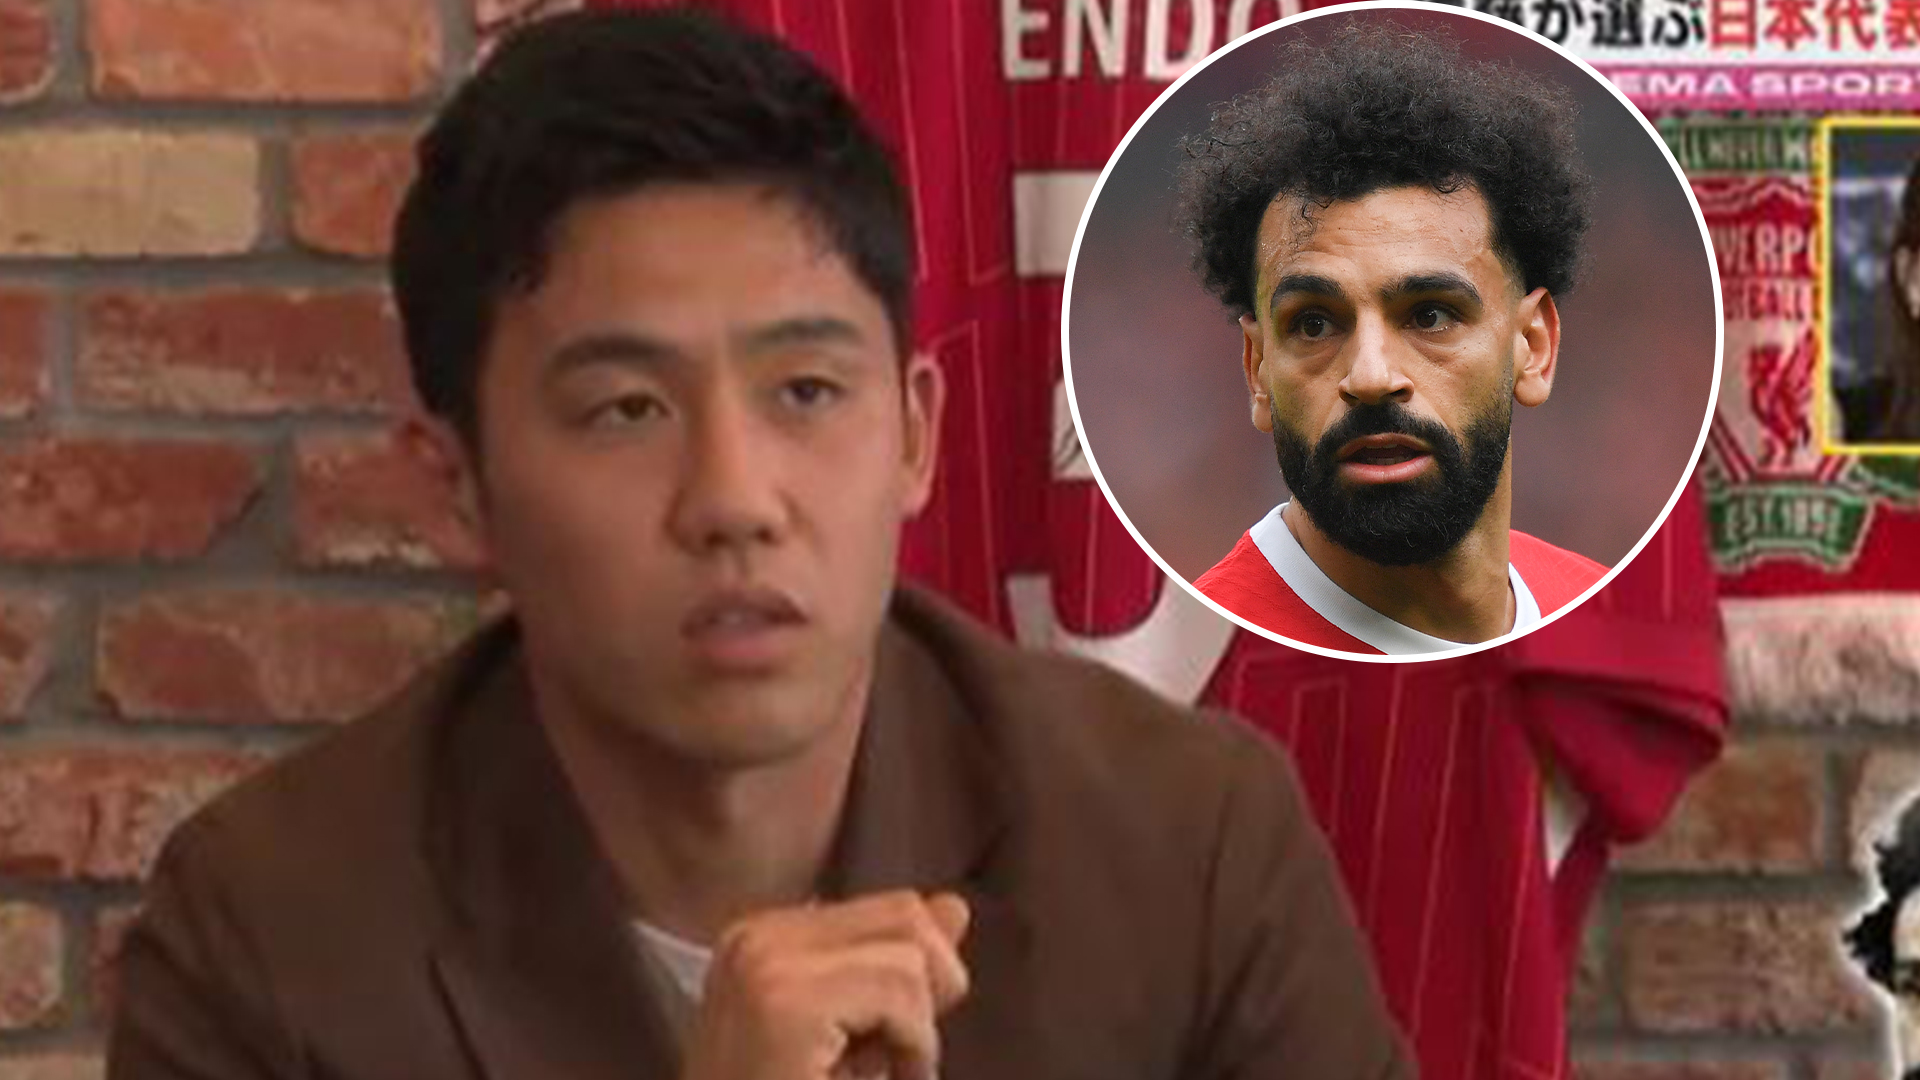 Endo appears to leak Mo Salah’s Liverpool exit in transfer bombshell on Japanese TV [Video]